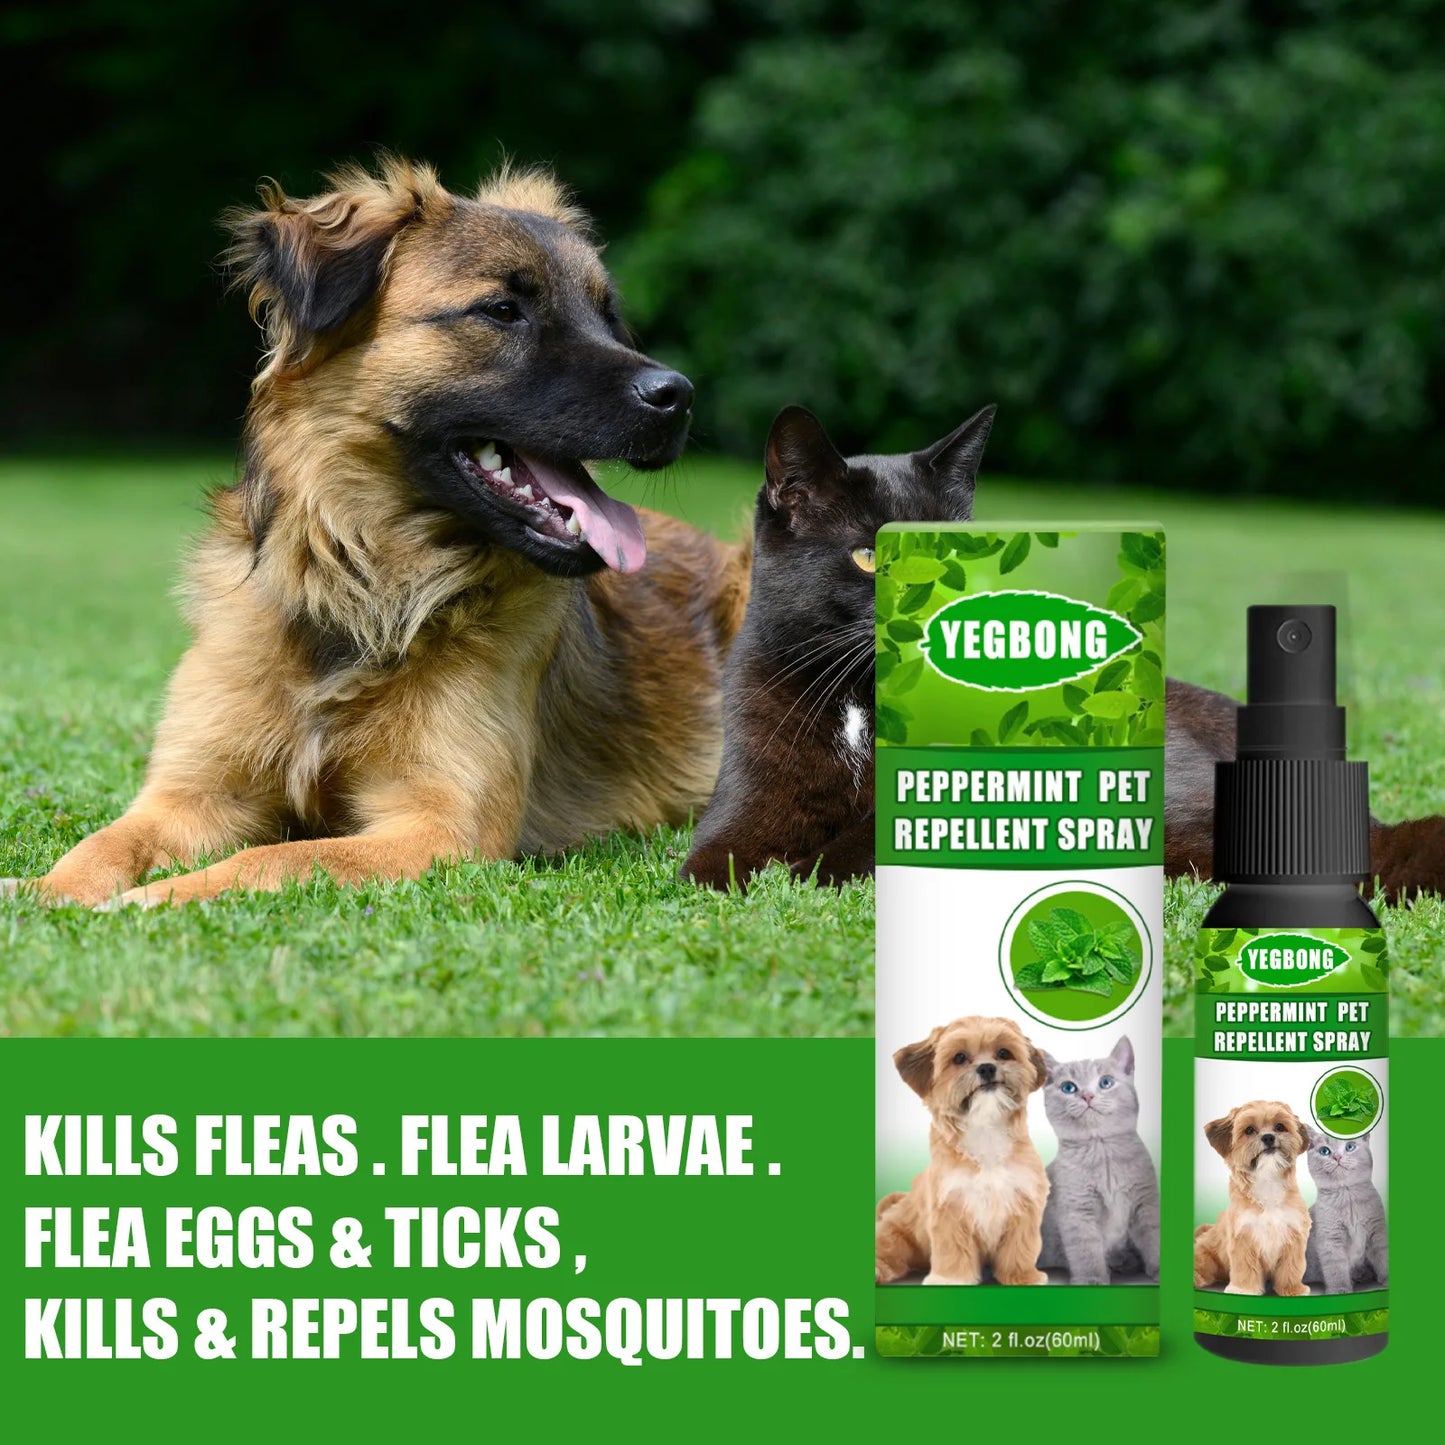 Long-Lasting Relief from Fleas, Ticks, Lice, Mites, and Ringworm in Dogs and Cats